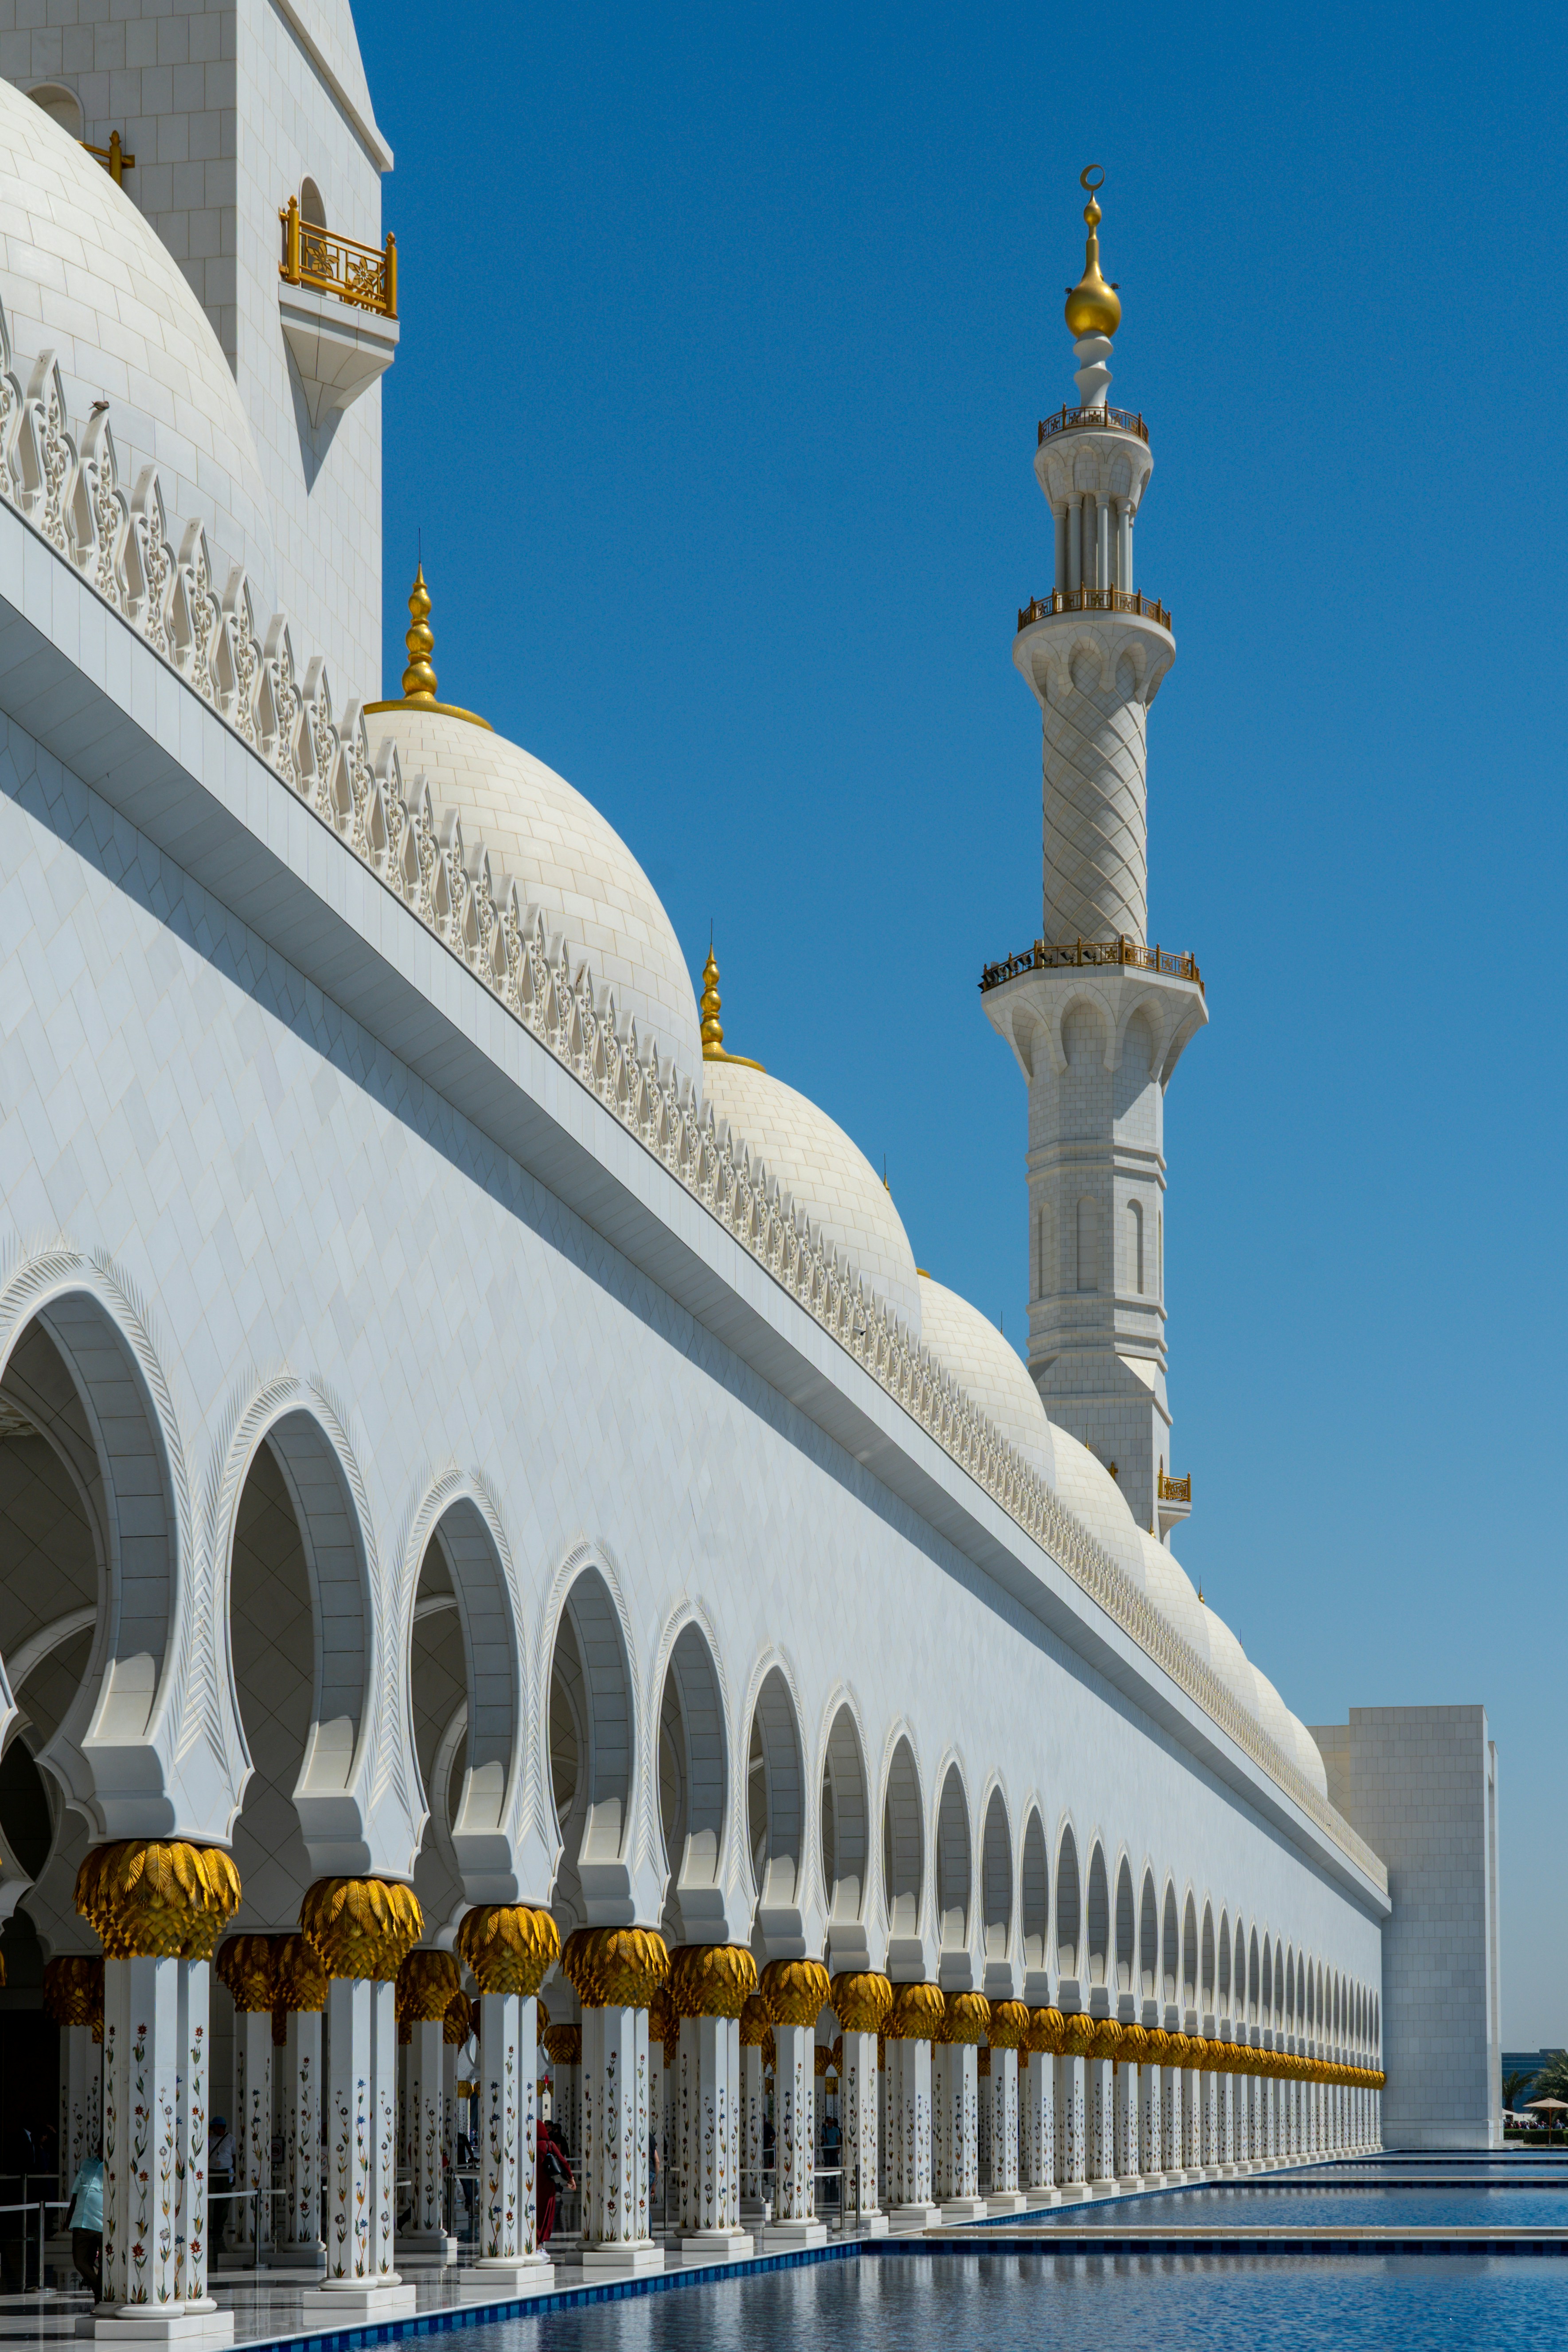 One of the exterior walkways at the Sheik Zayed Grand Mosque, Abu Dhabi. The white of the marble and blue of the water and sky, compliment each other perfectly.